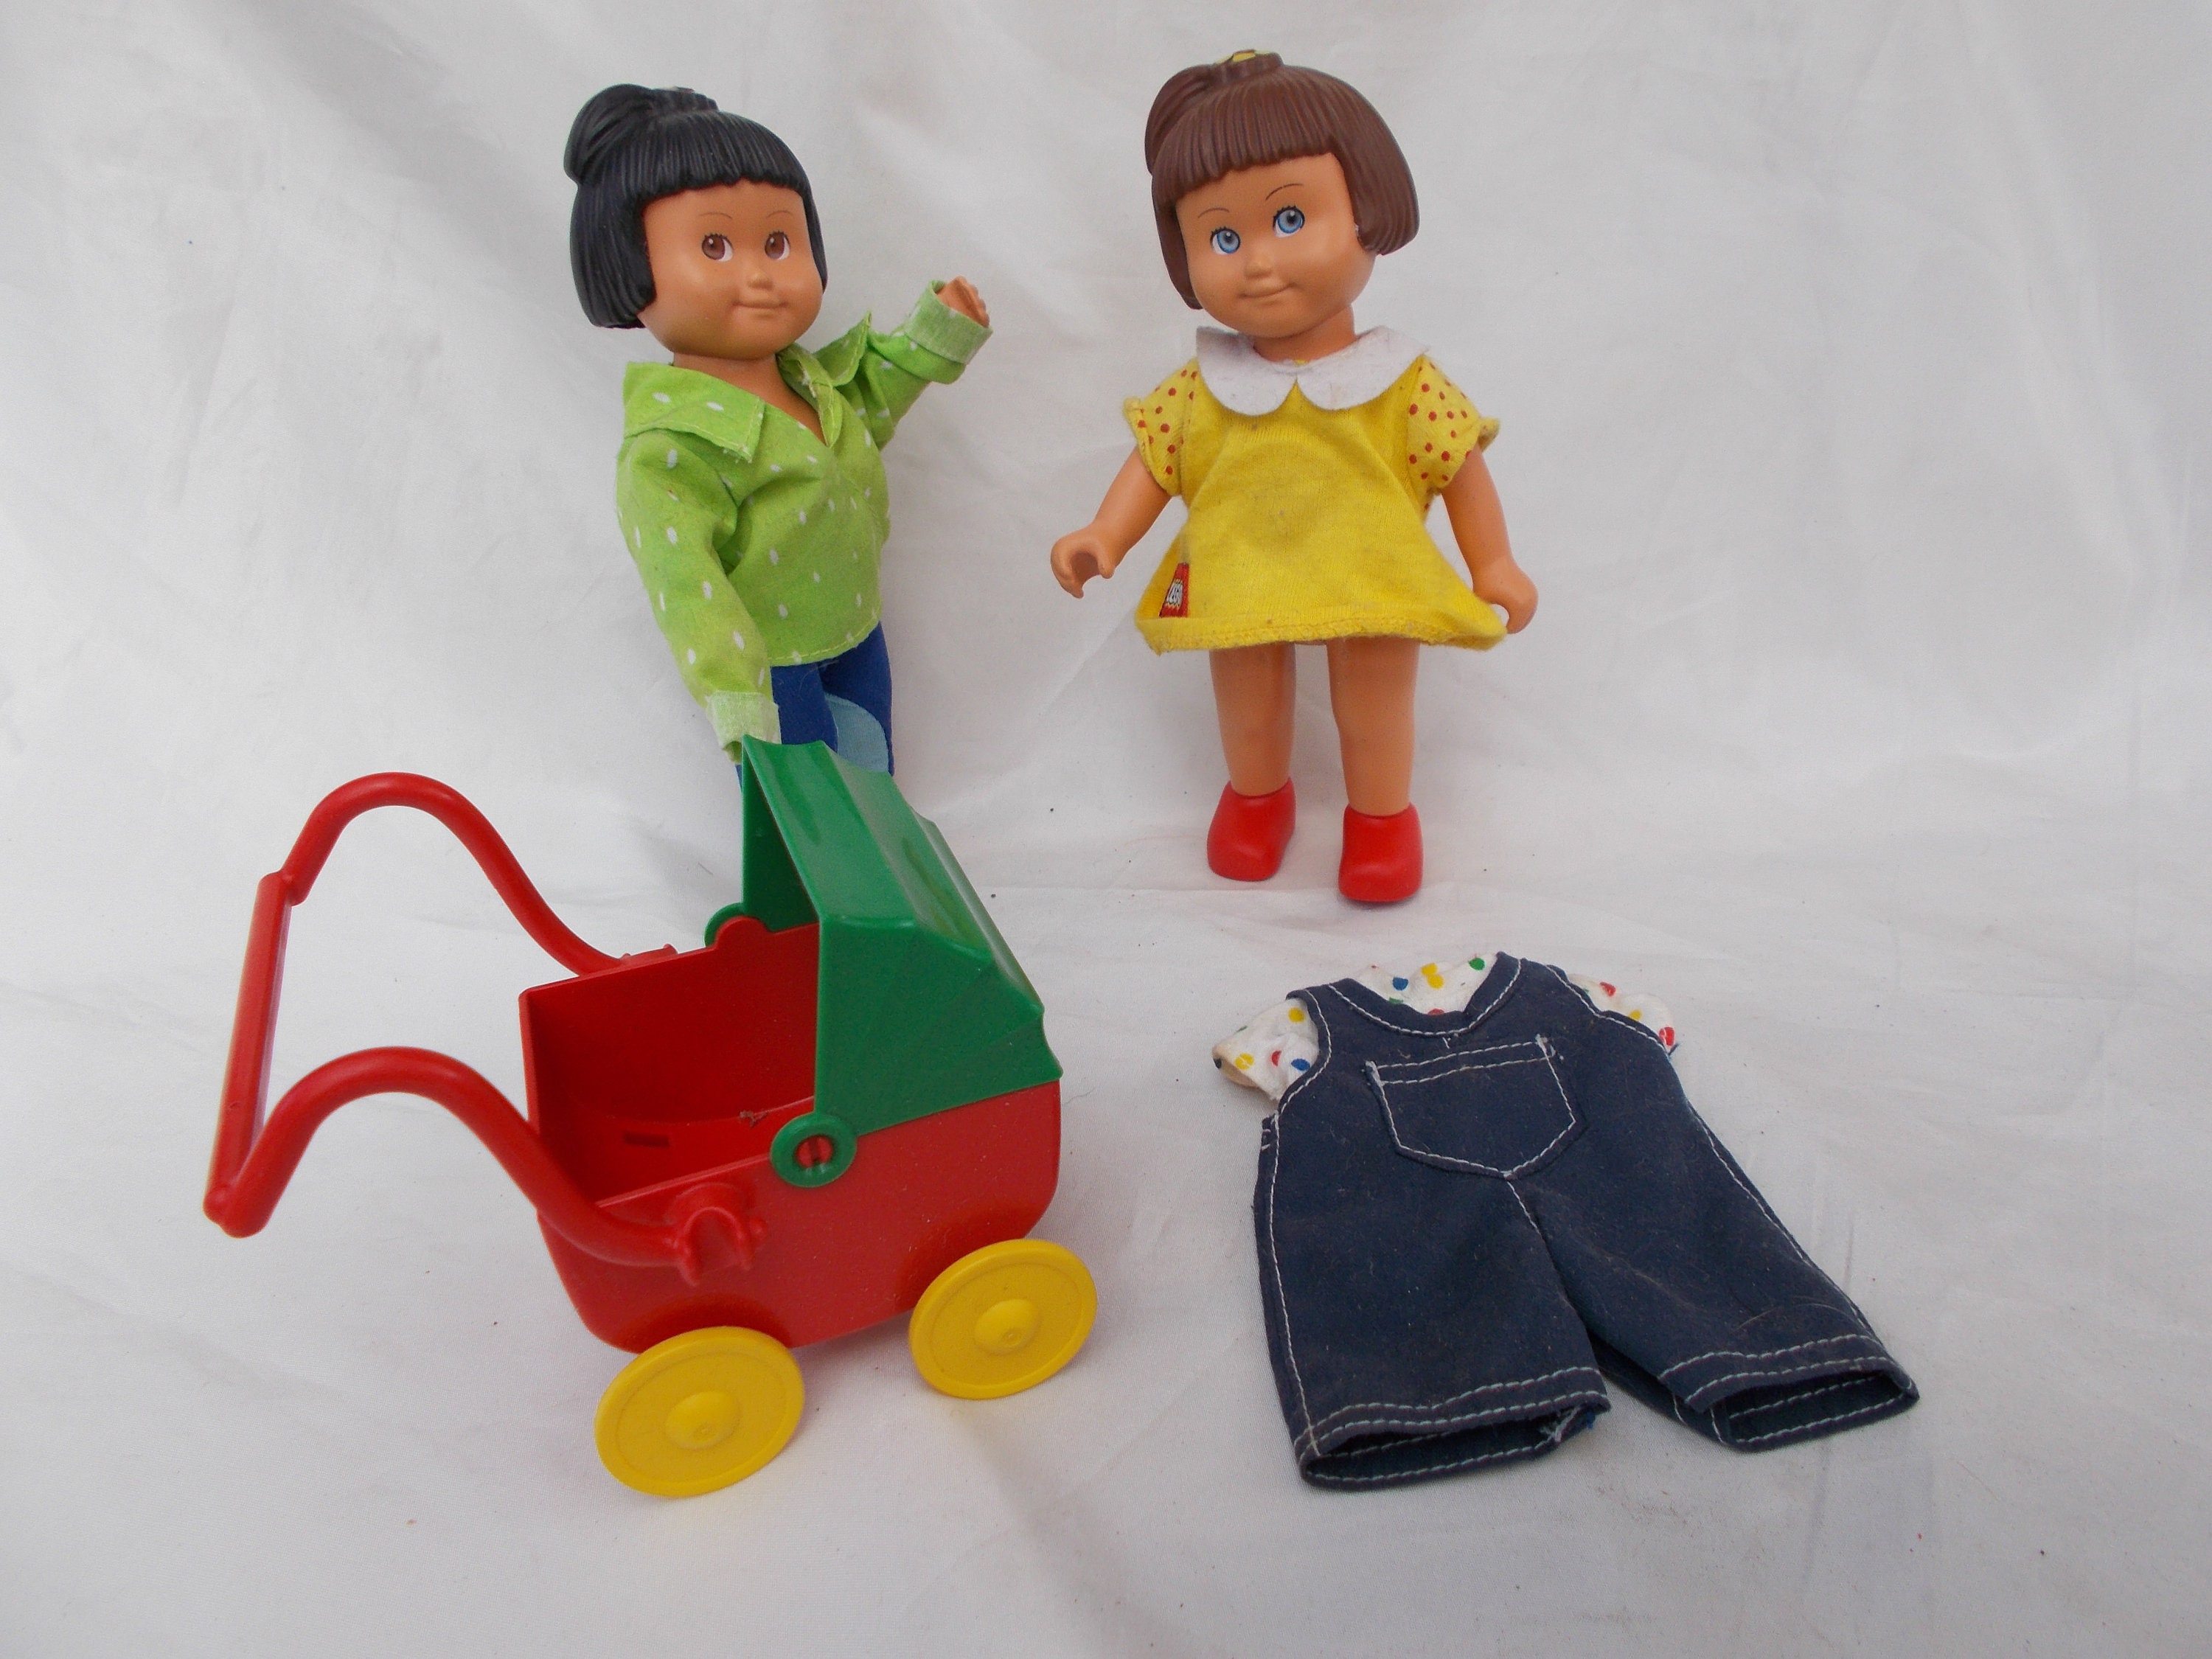 Vintage Duplo Dolls Lisa and Marie With Stroller - Etsy